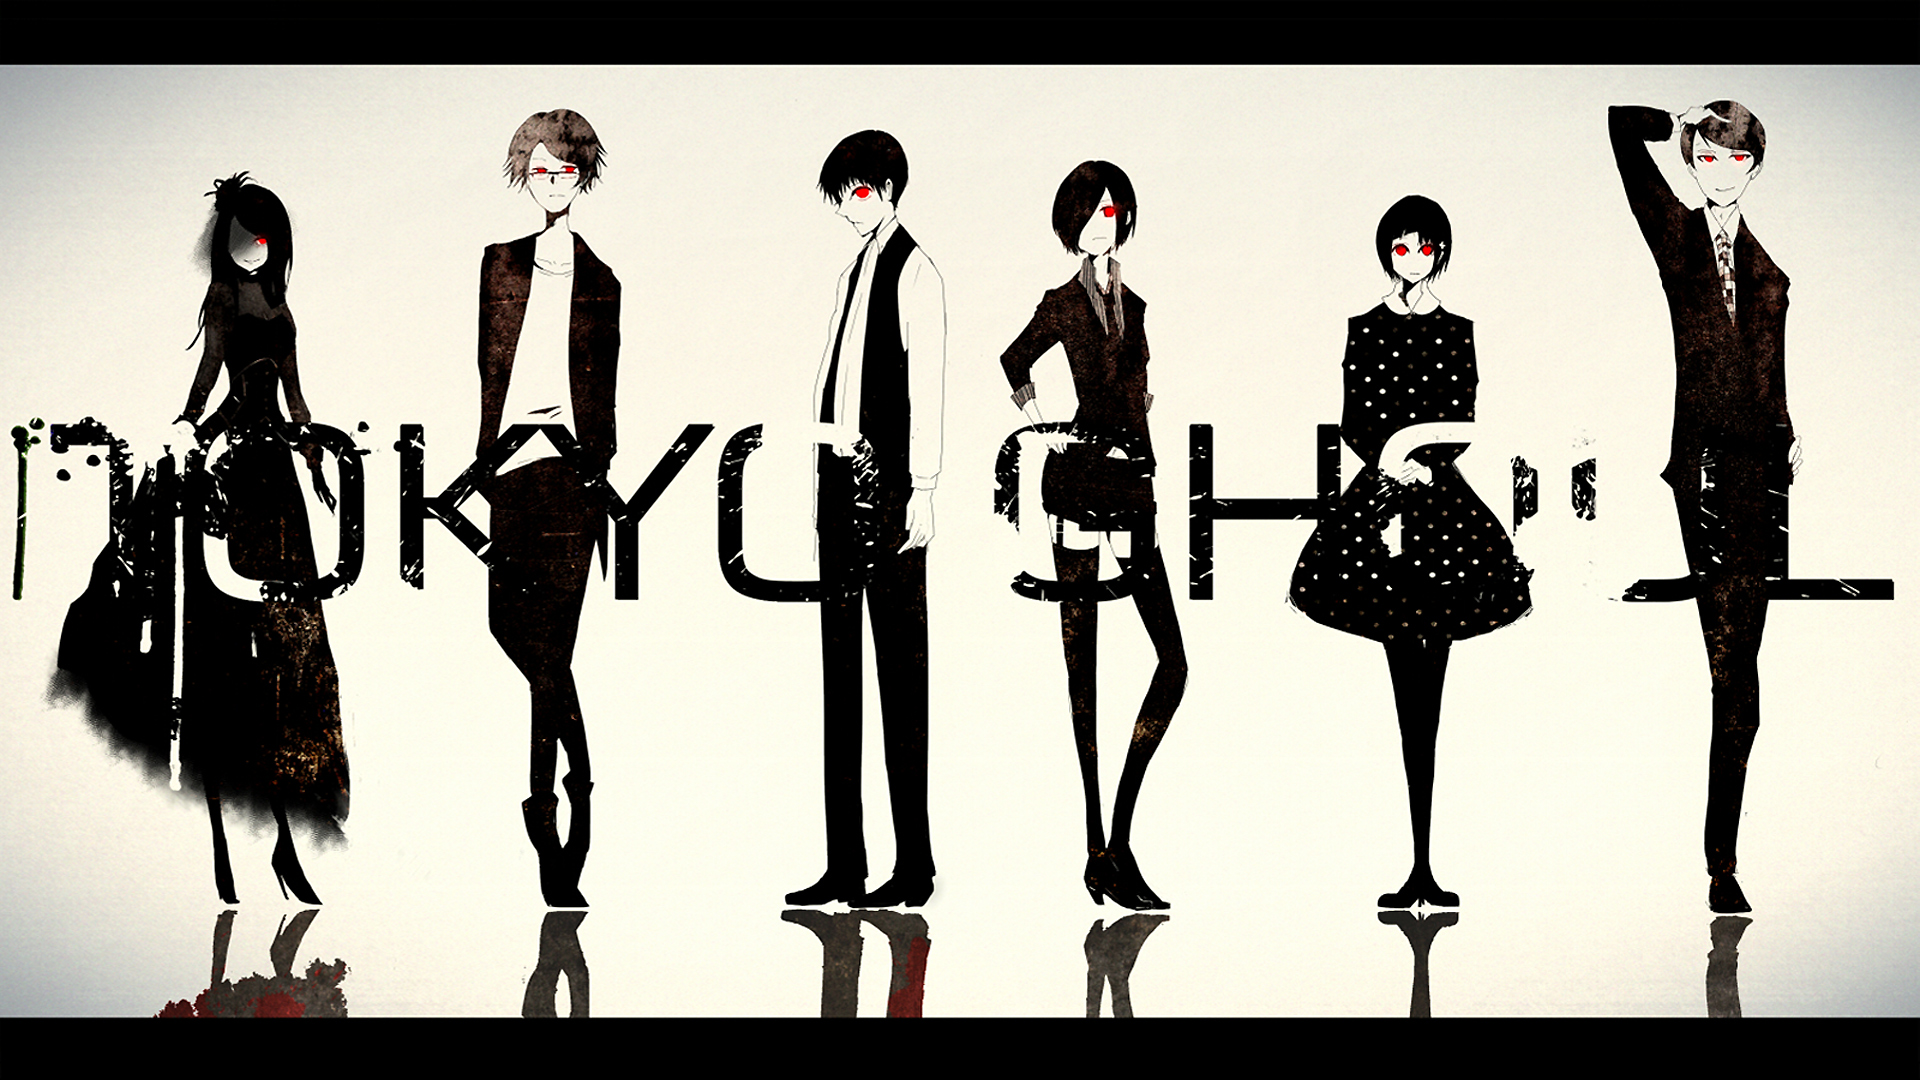 tokyo ghoul anime mask characters hd 1920x1080 1080p and compatible 1920x1080